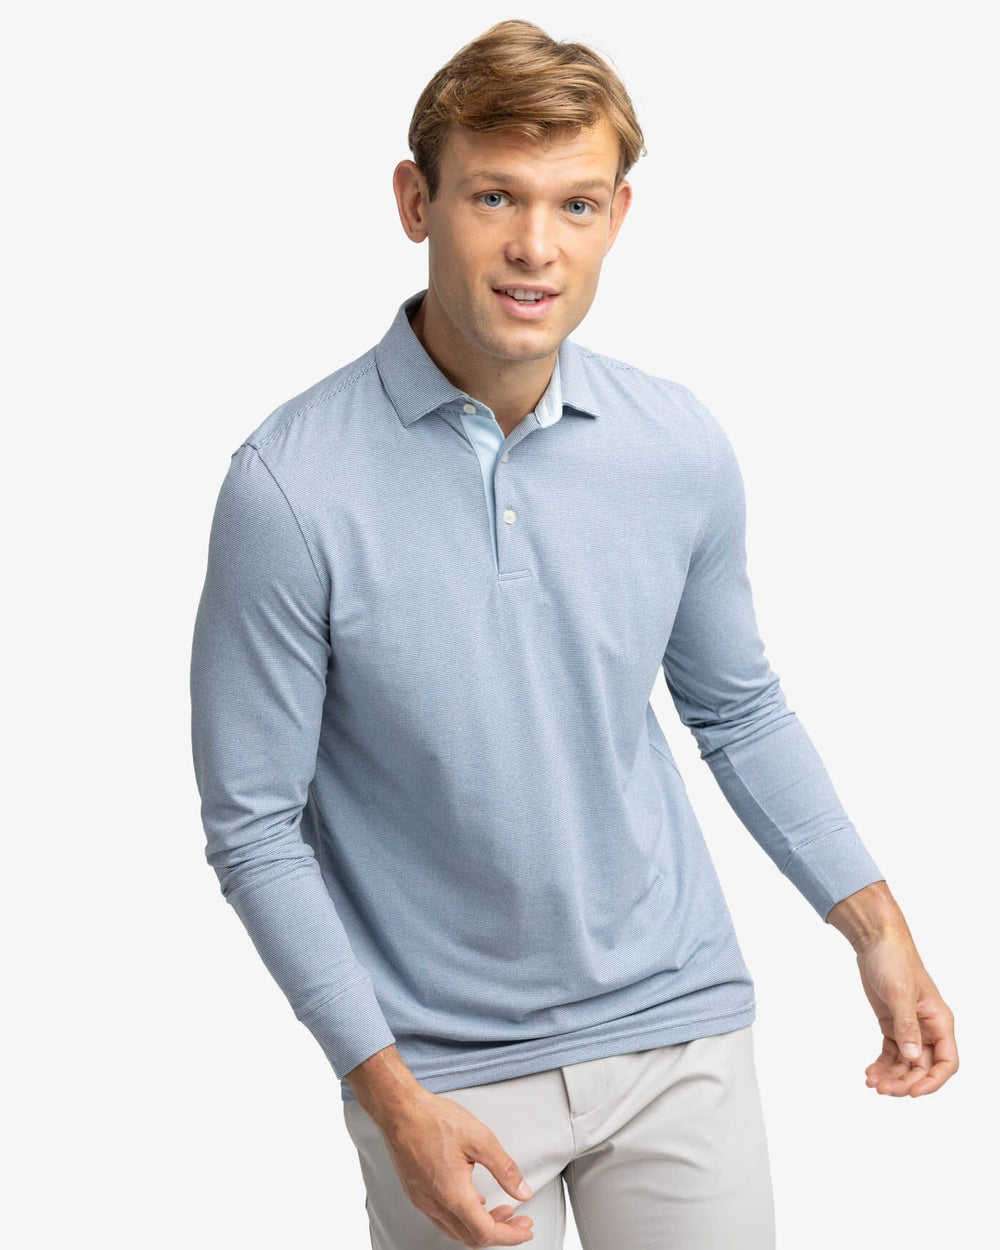 The front view of the Southern Tide Ryder Heather Ridgeway Stripe Long Sleeve Performance Polo by Southern Tide - Heather Dress Blue